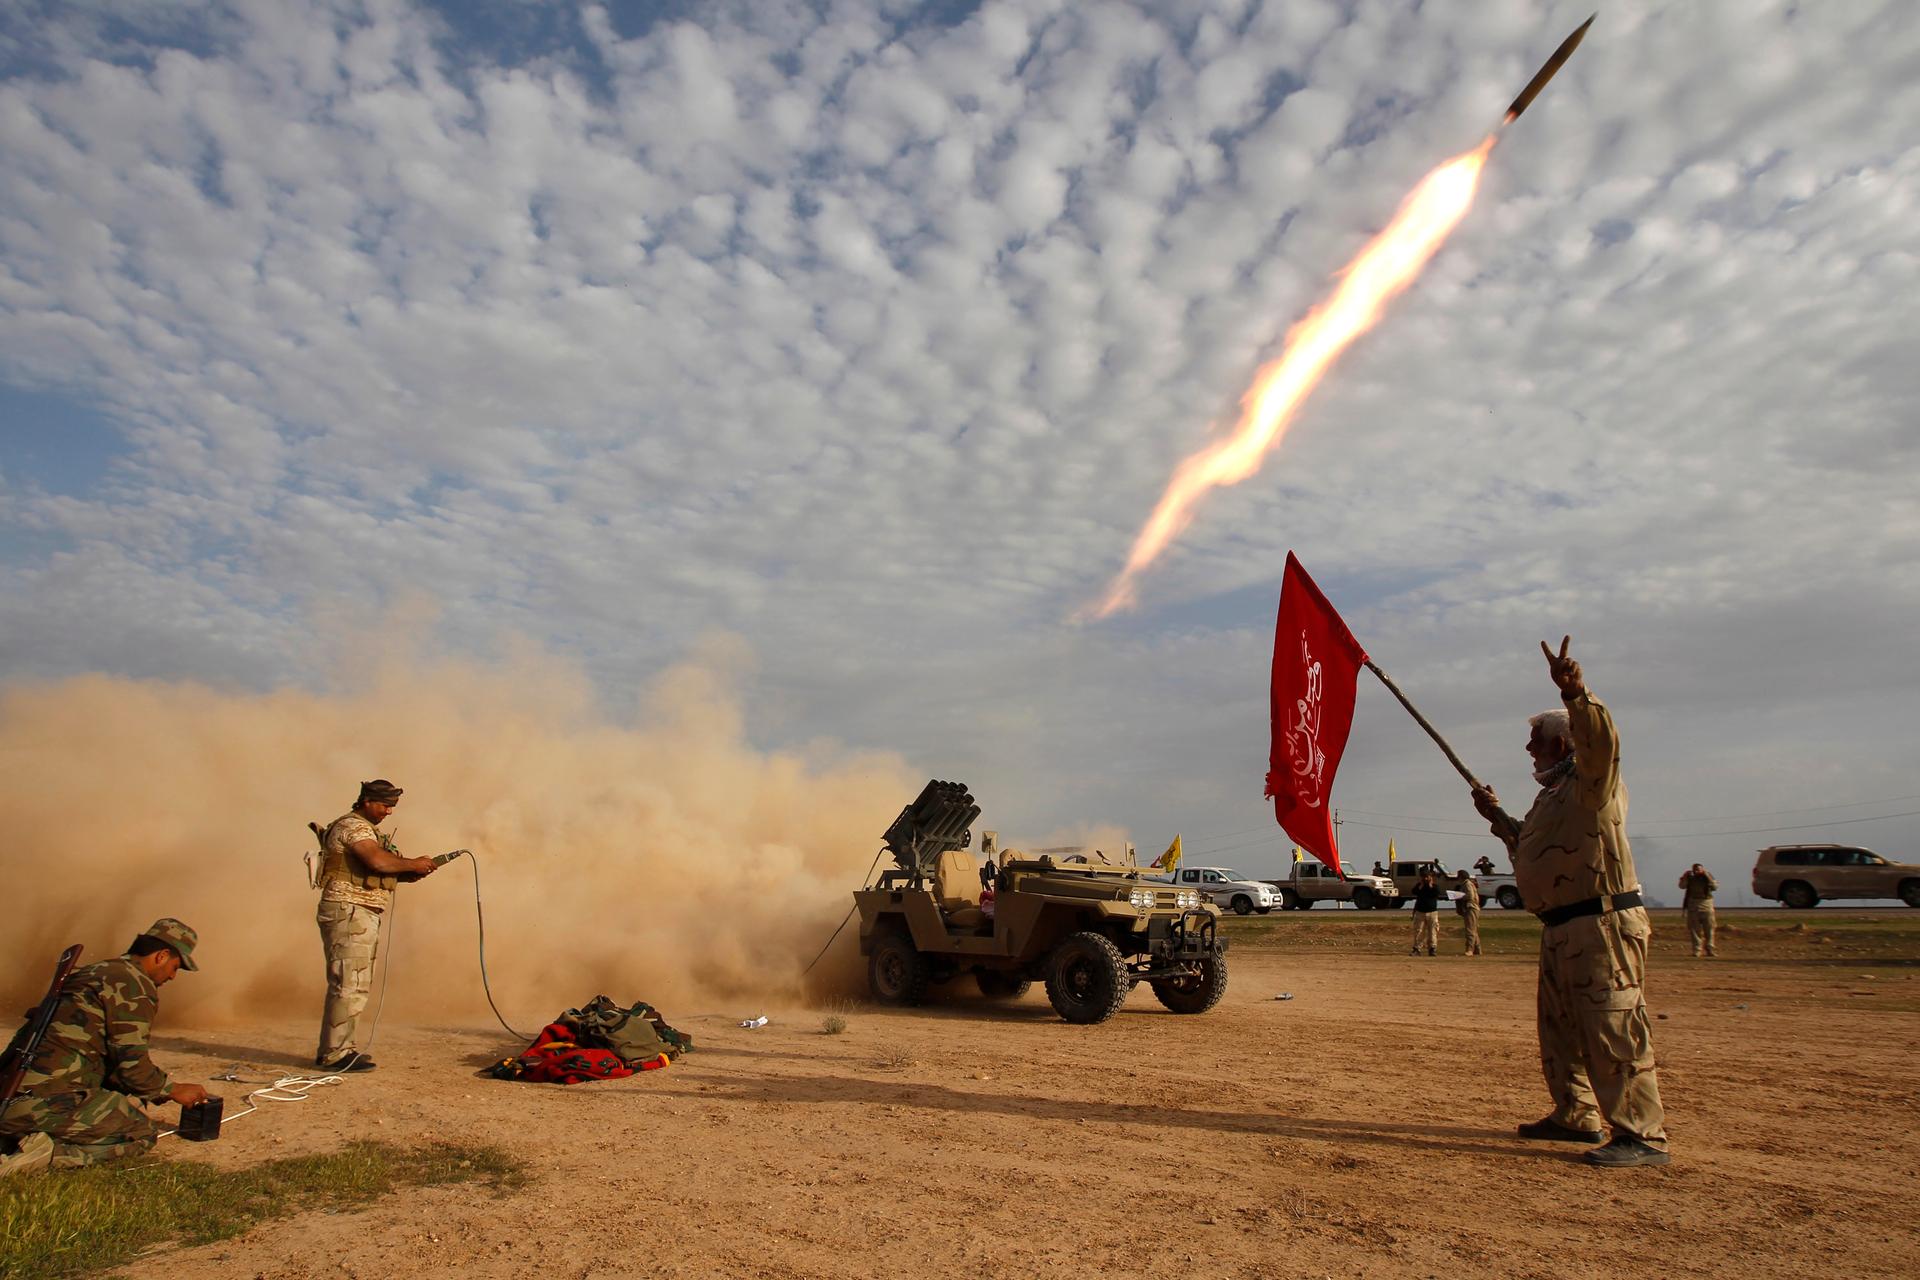 Shi'ite fighters launch a rocket during clashes with Islamic State militants on the outskirts of al-Alam March 8, 2015.